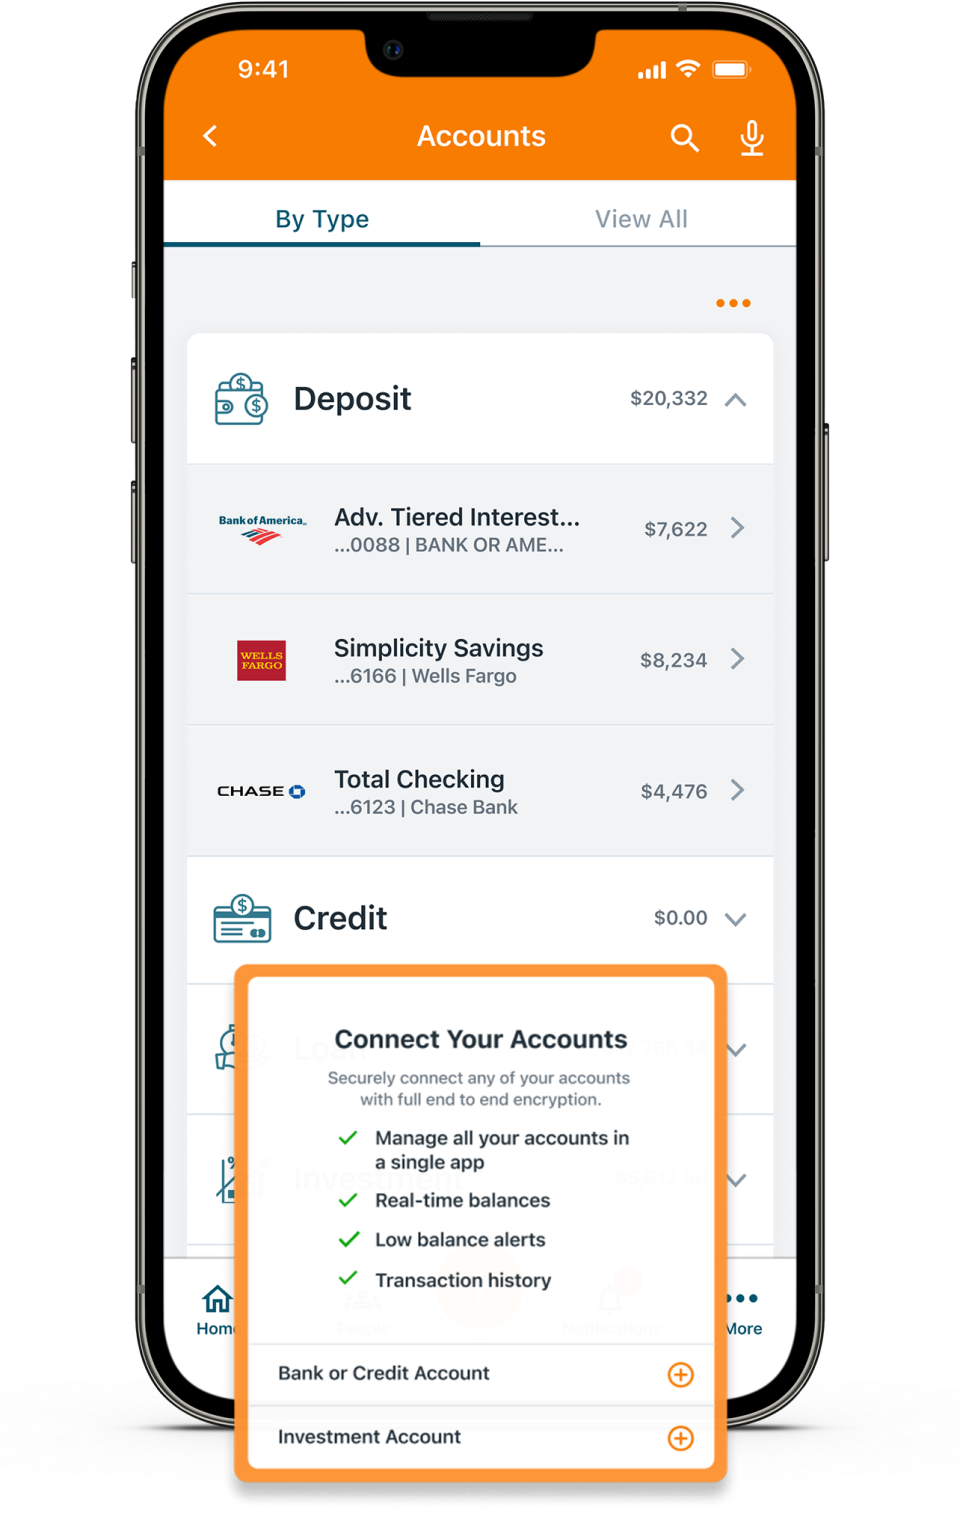 Collect'd - Screenshot of Connected Bank Accounts